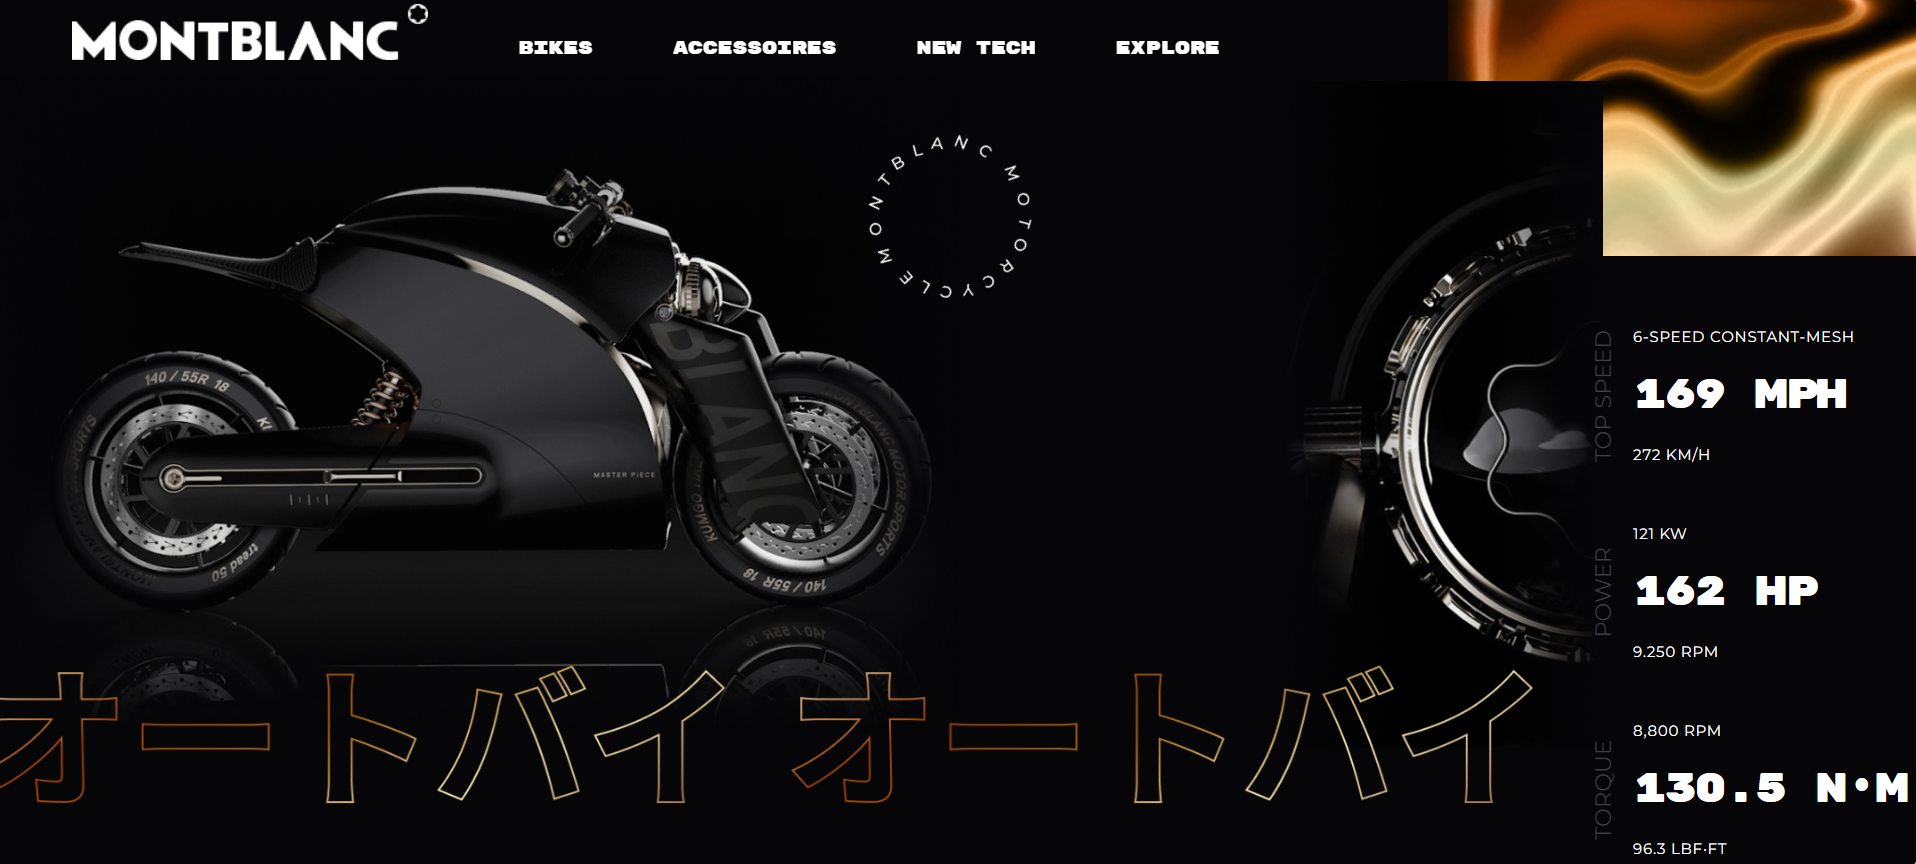 project Montblanc Motorcycle